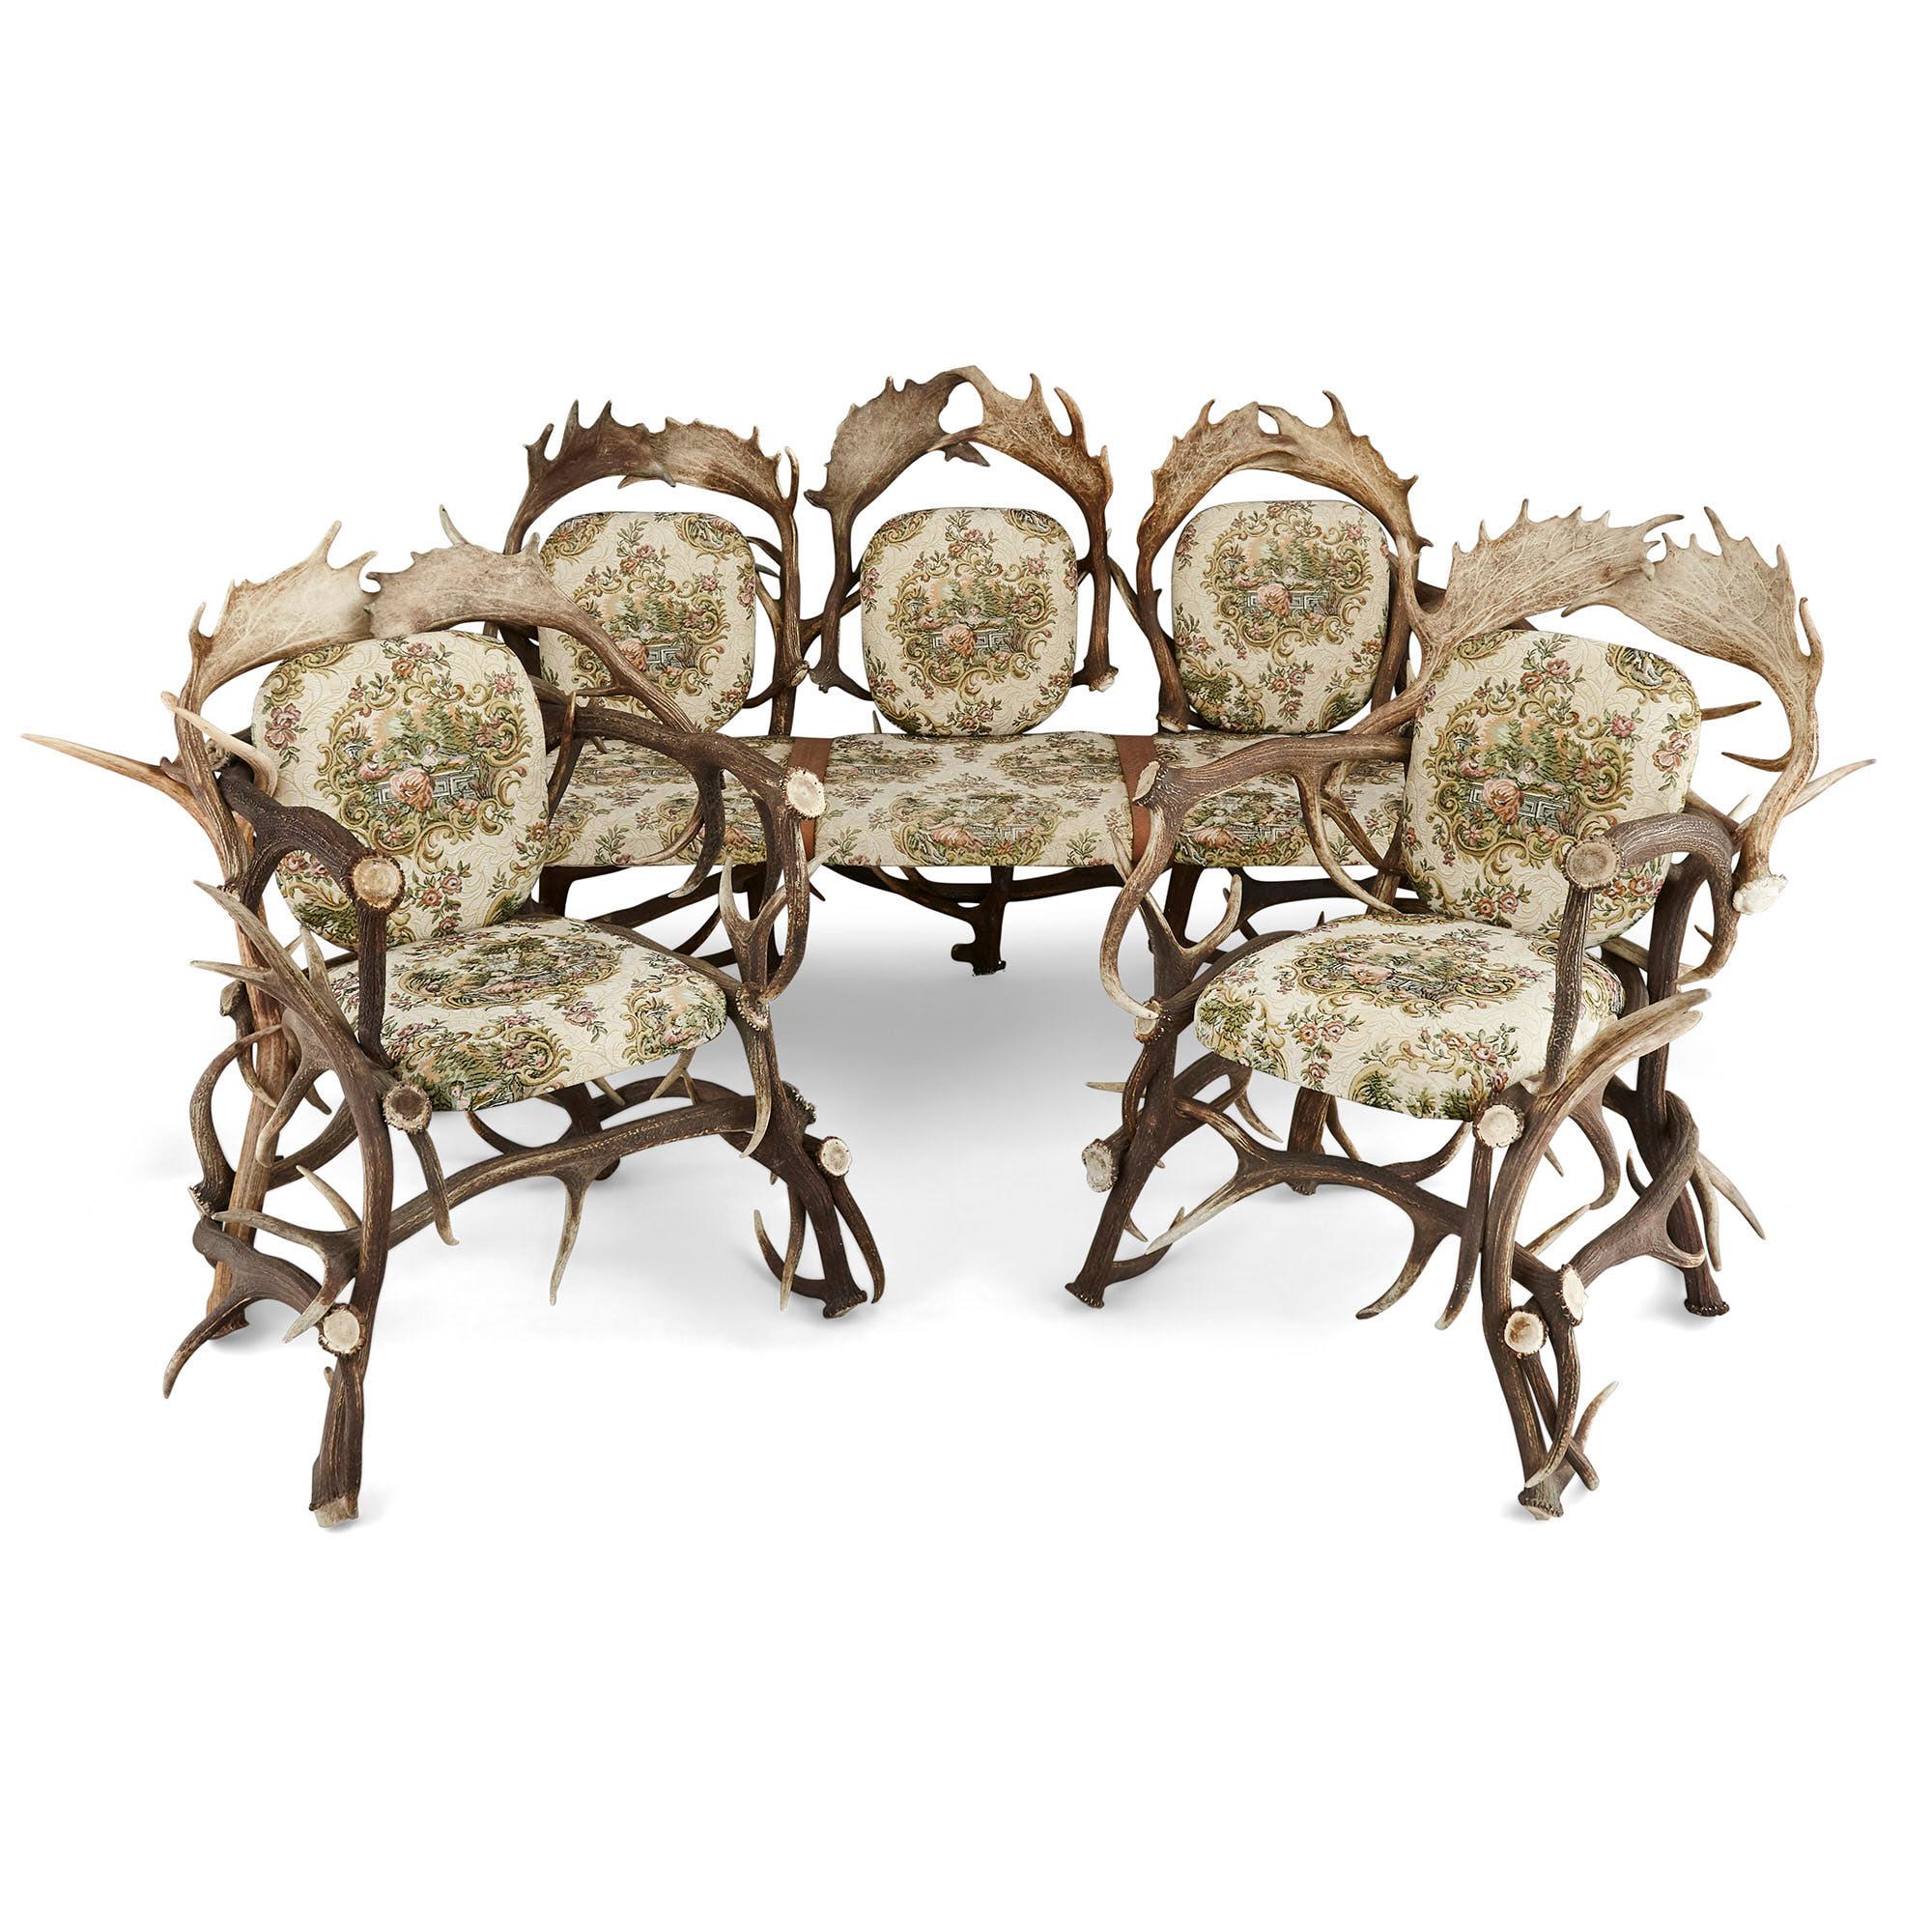 20th Century Pair of Antique German Antler Chairs with Rococo Style Upholstery For Sale